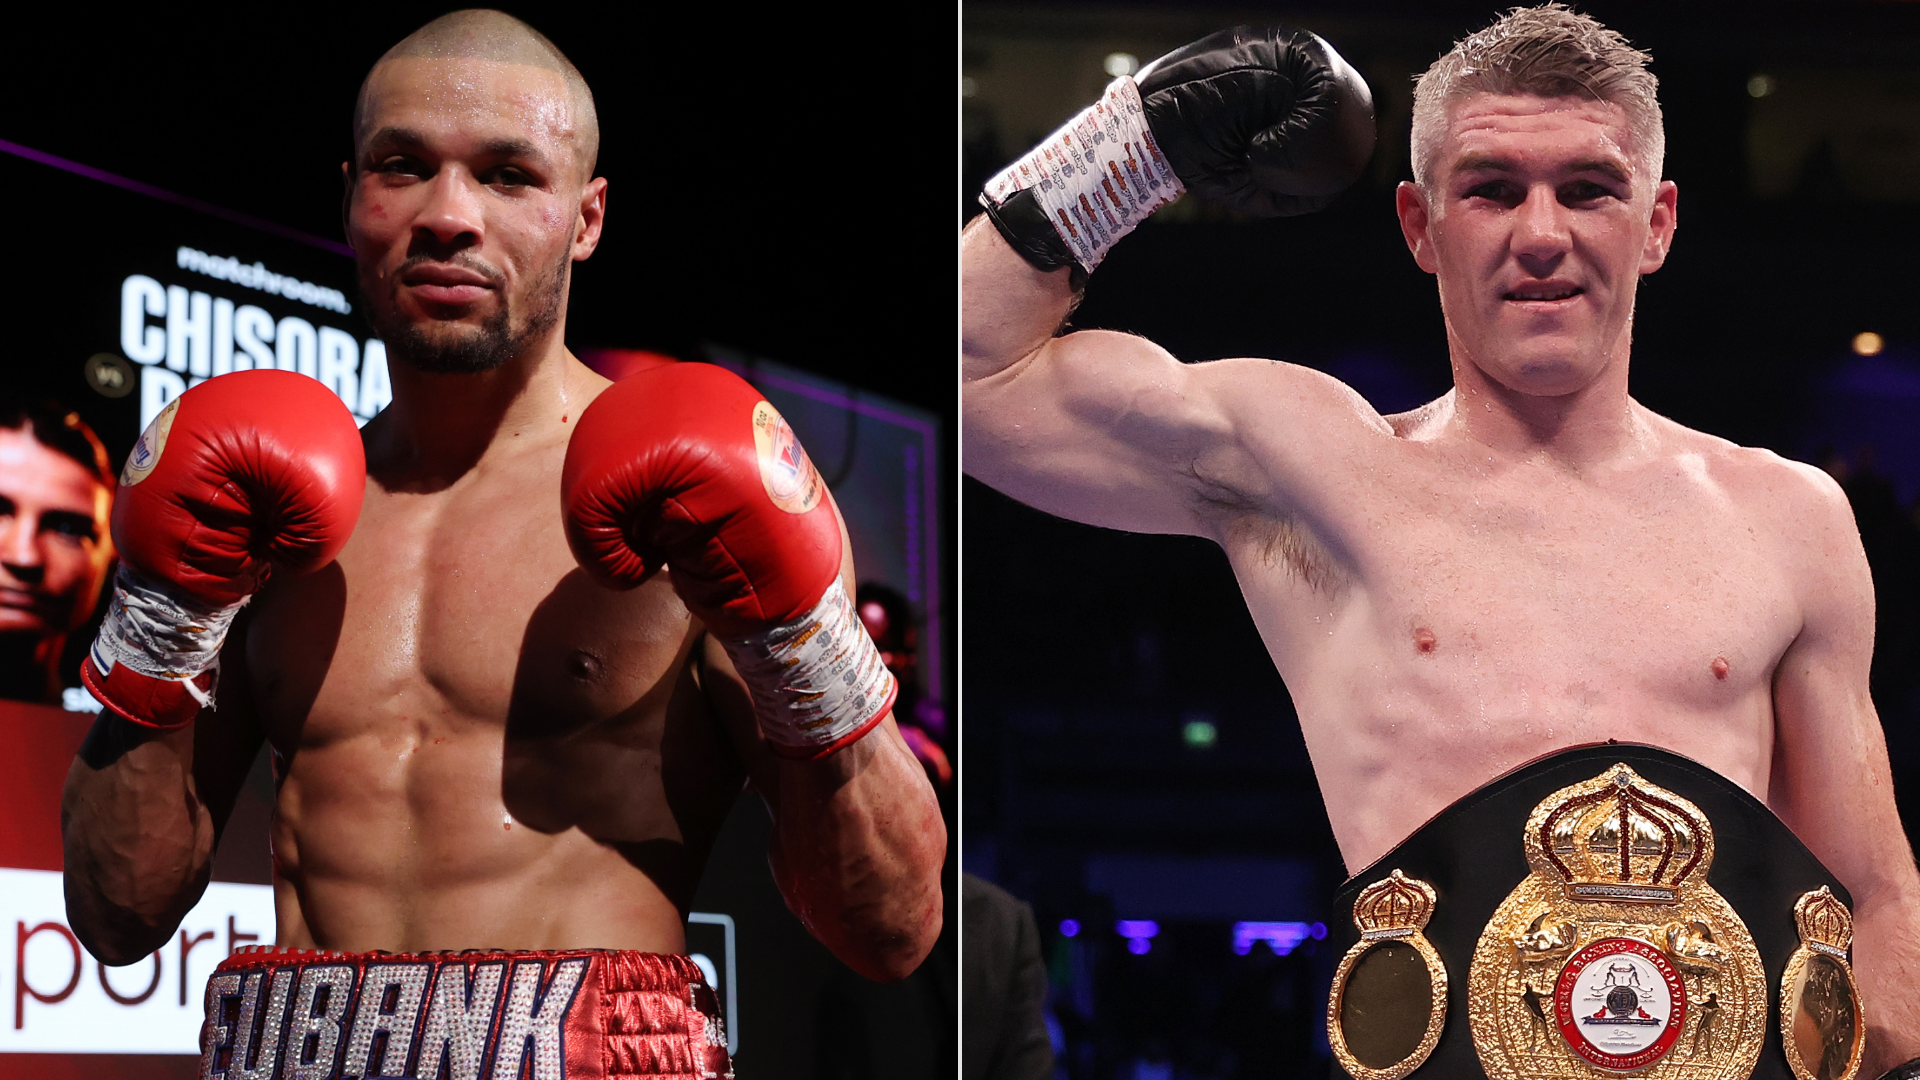 Liam Smith vs. Chris Eubank Jr.: Preview, Where to Watch and Betting Odds